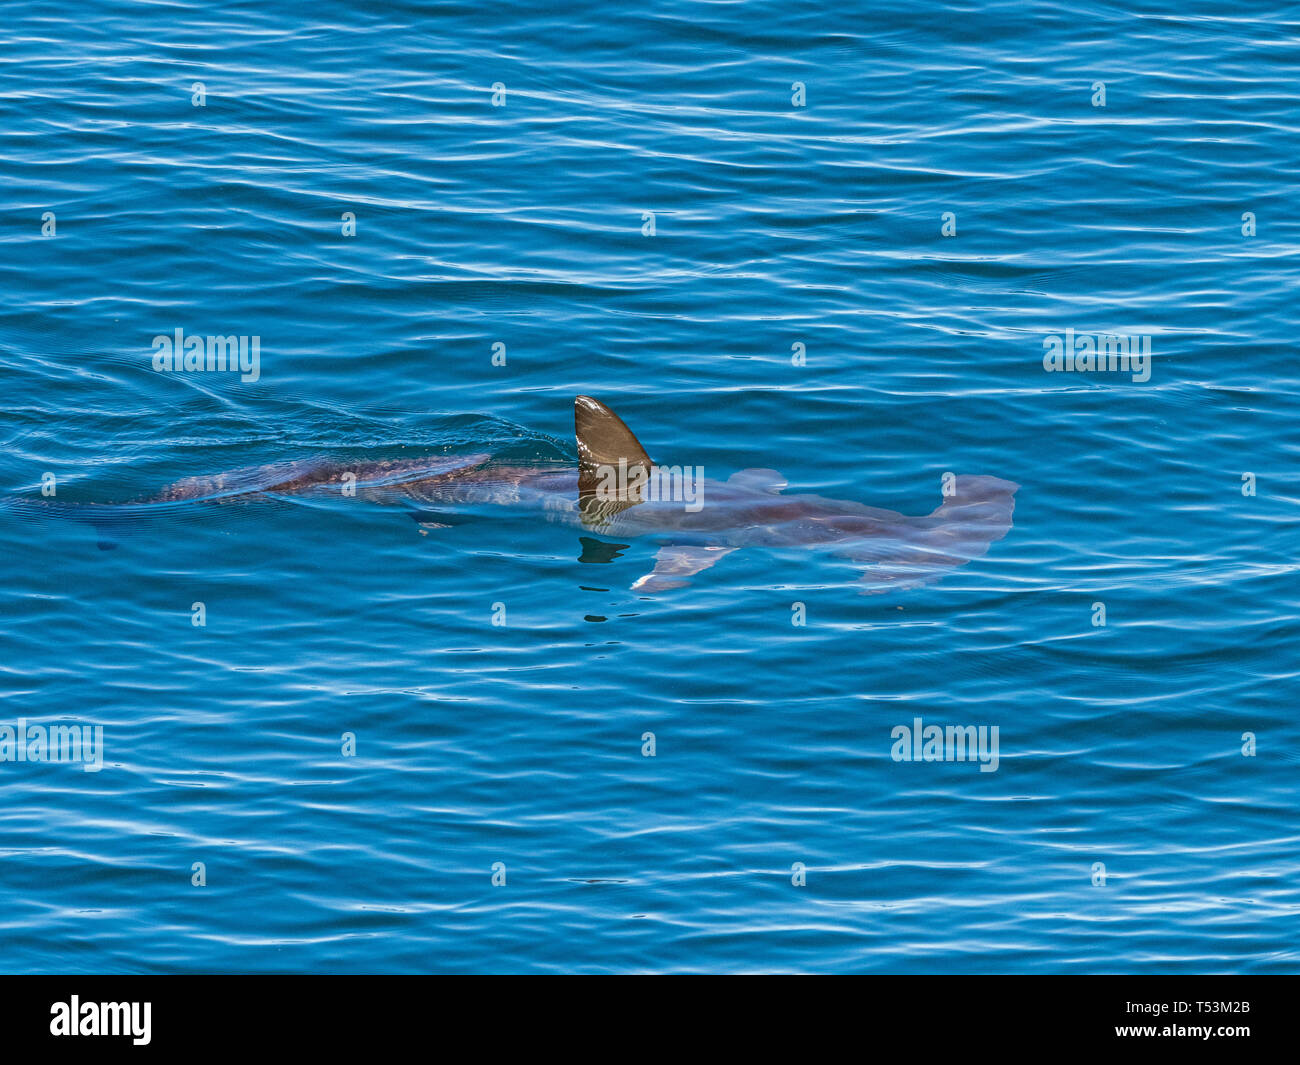 A hammerhead shark cruises at the surface in the sea of Cortez, Baja, Mexico showing its distinctive head Stock Photo